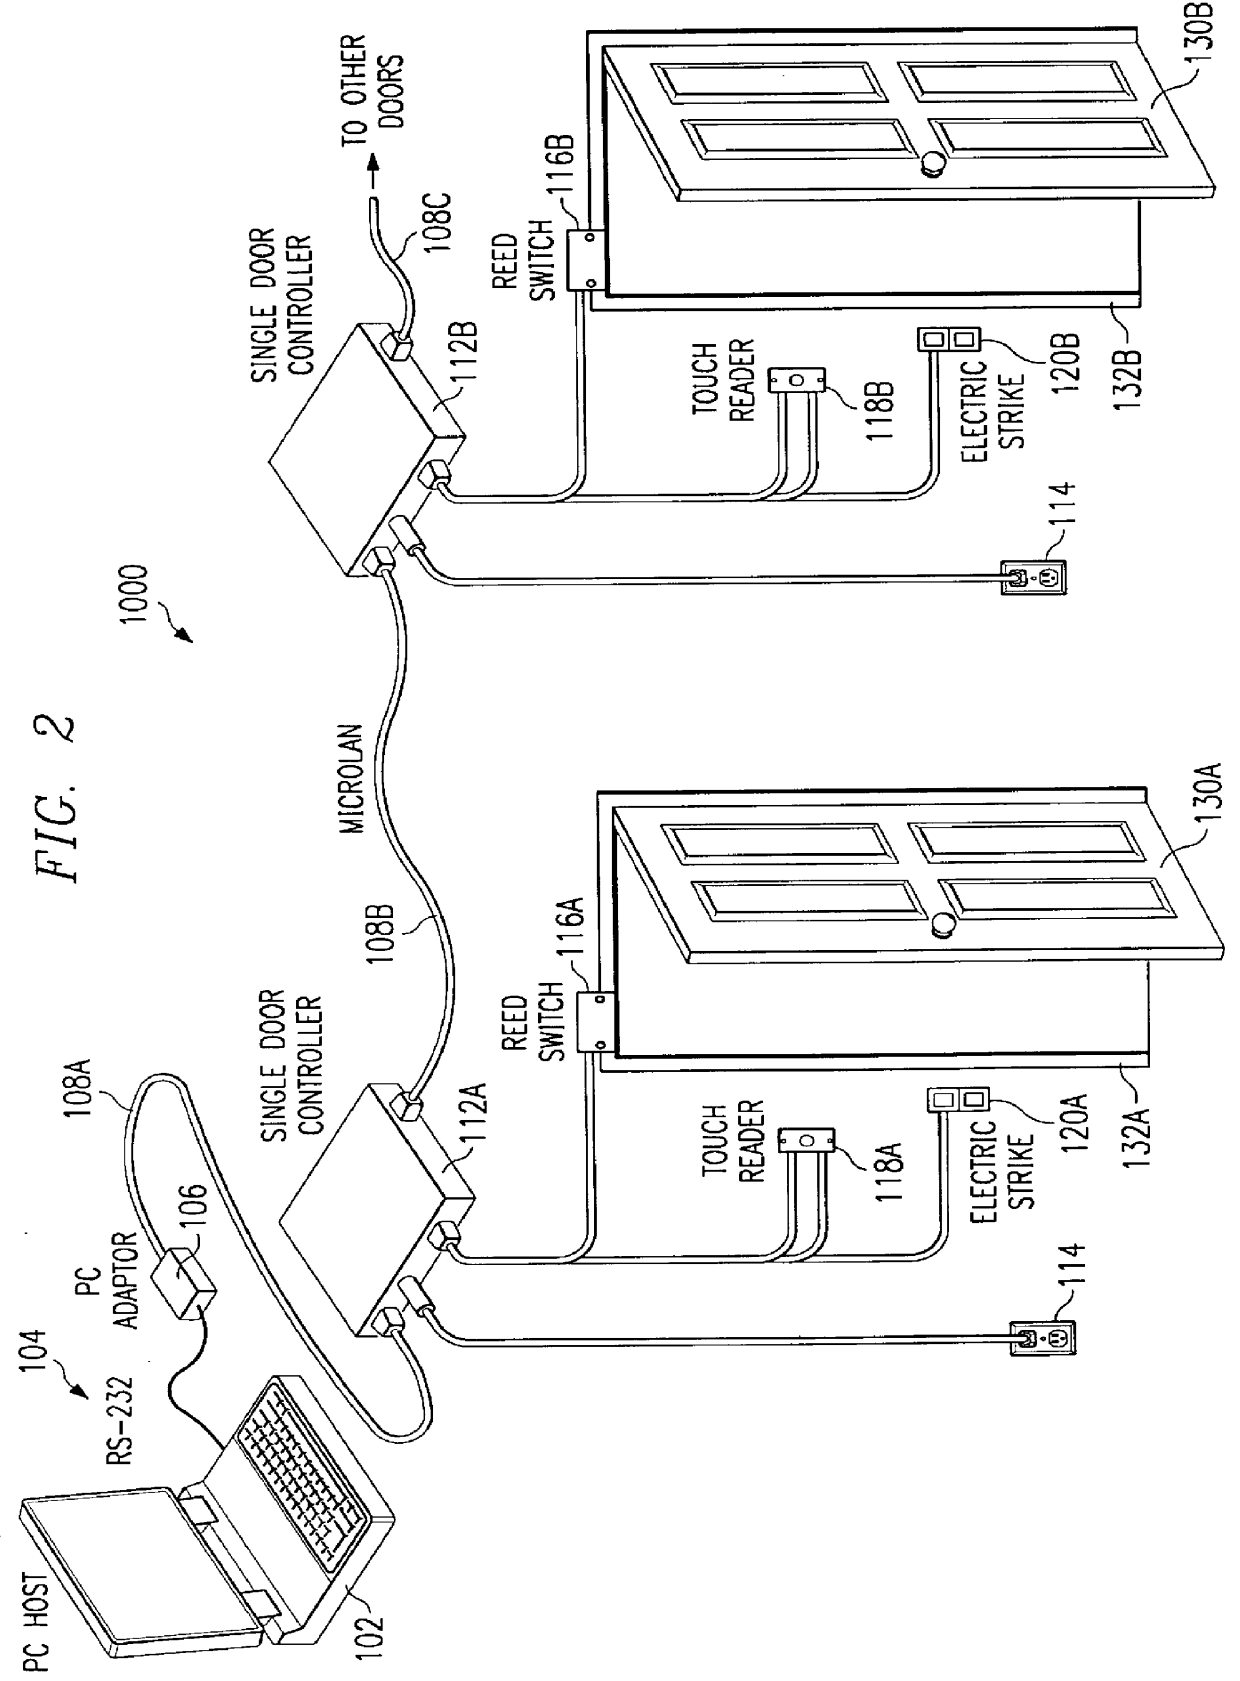 Electrical/mechanical access control systems and methods